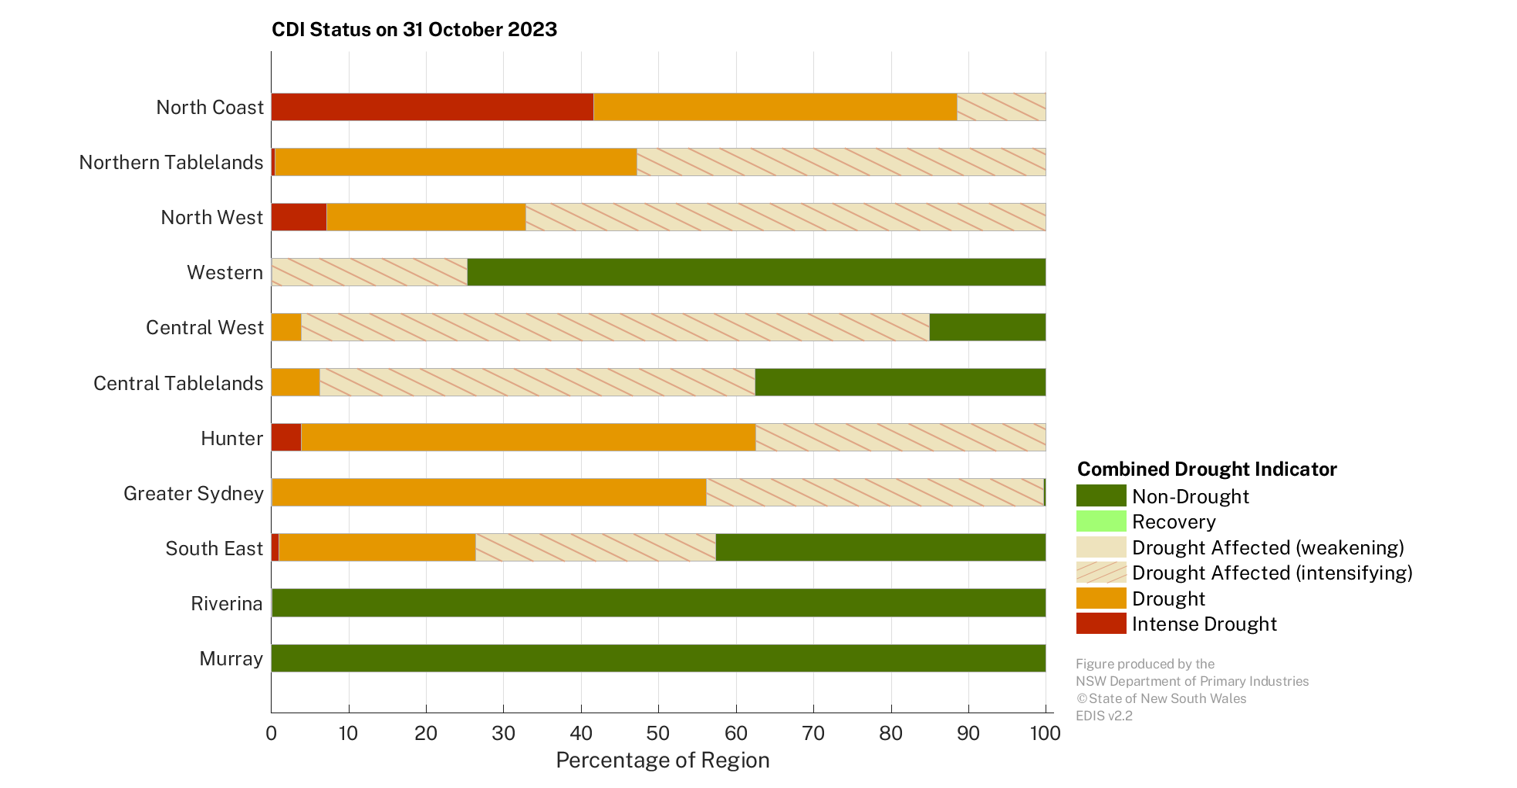 Figure 17. Combined Drought Indicator status for each individual Local Land Services region – 31 October 2023